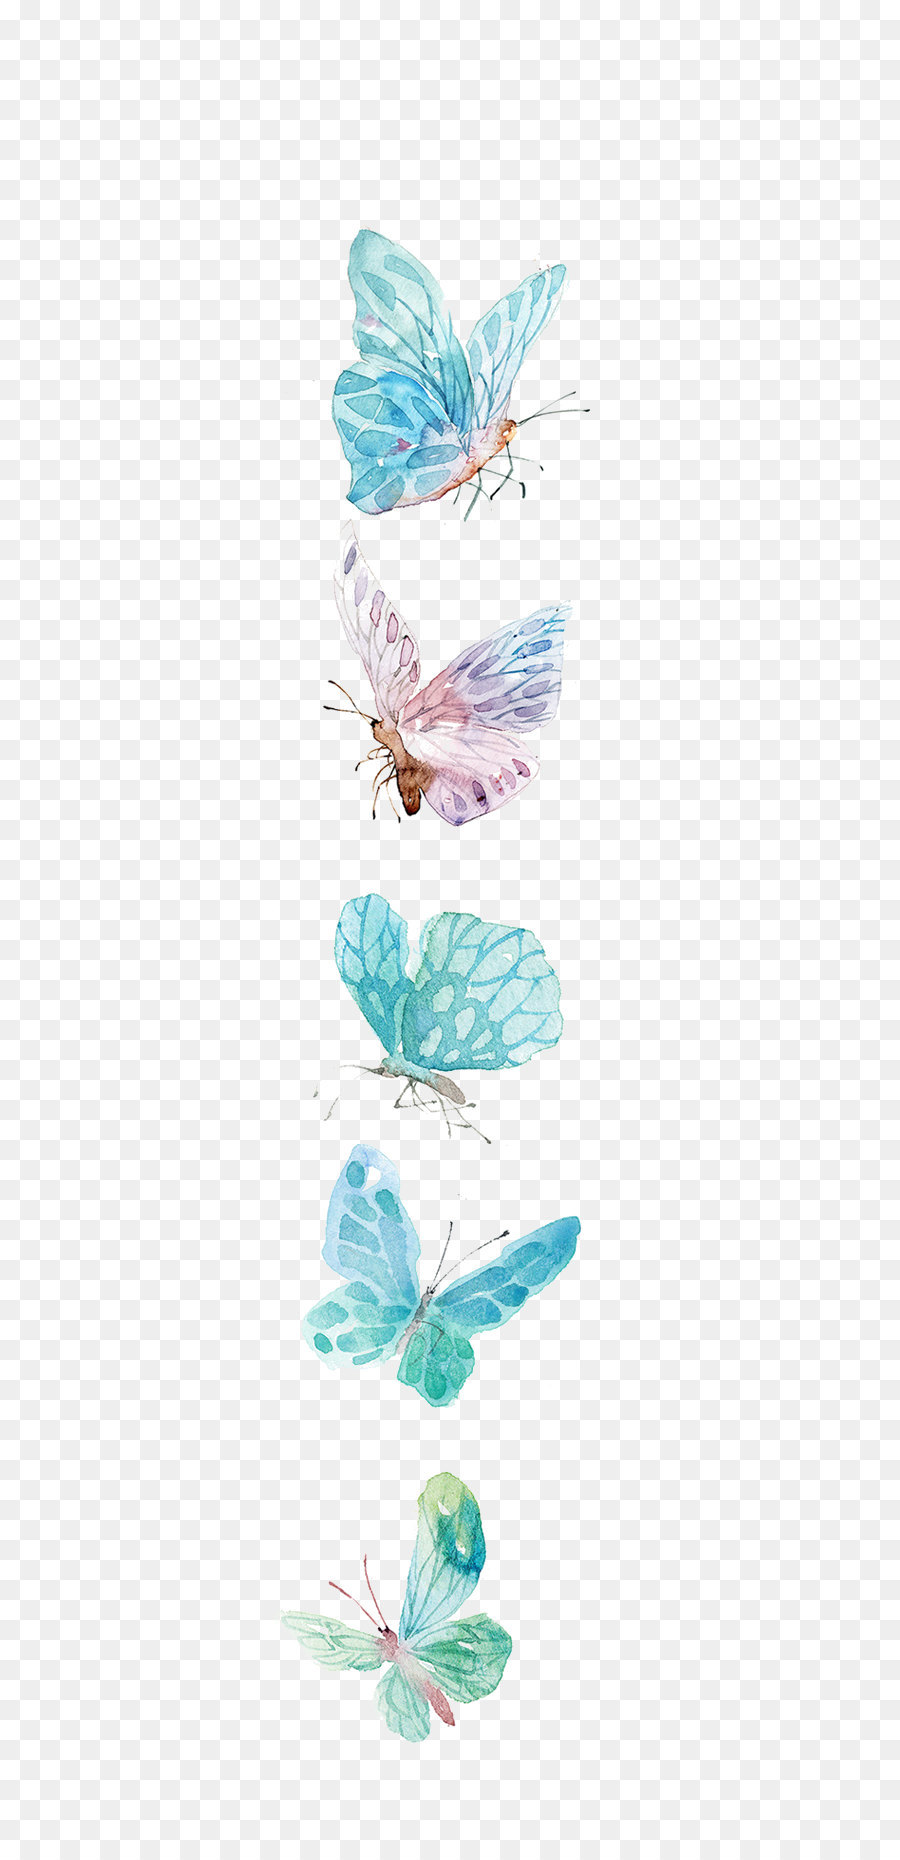 Butterfly Icon - Watercolor butterfly png download - 608*1849 - Free